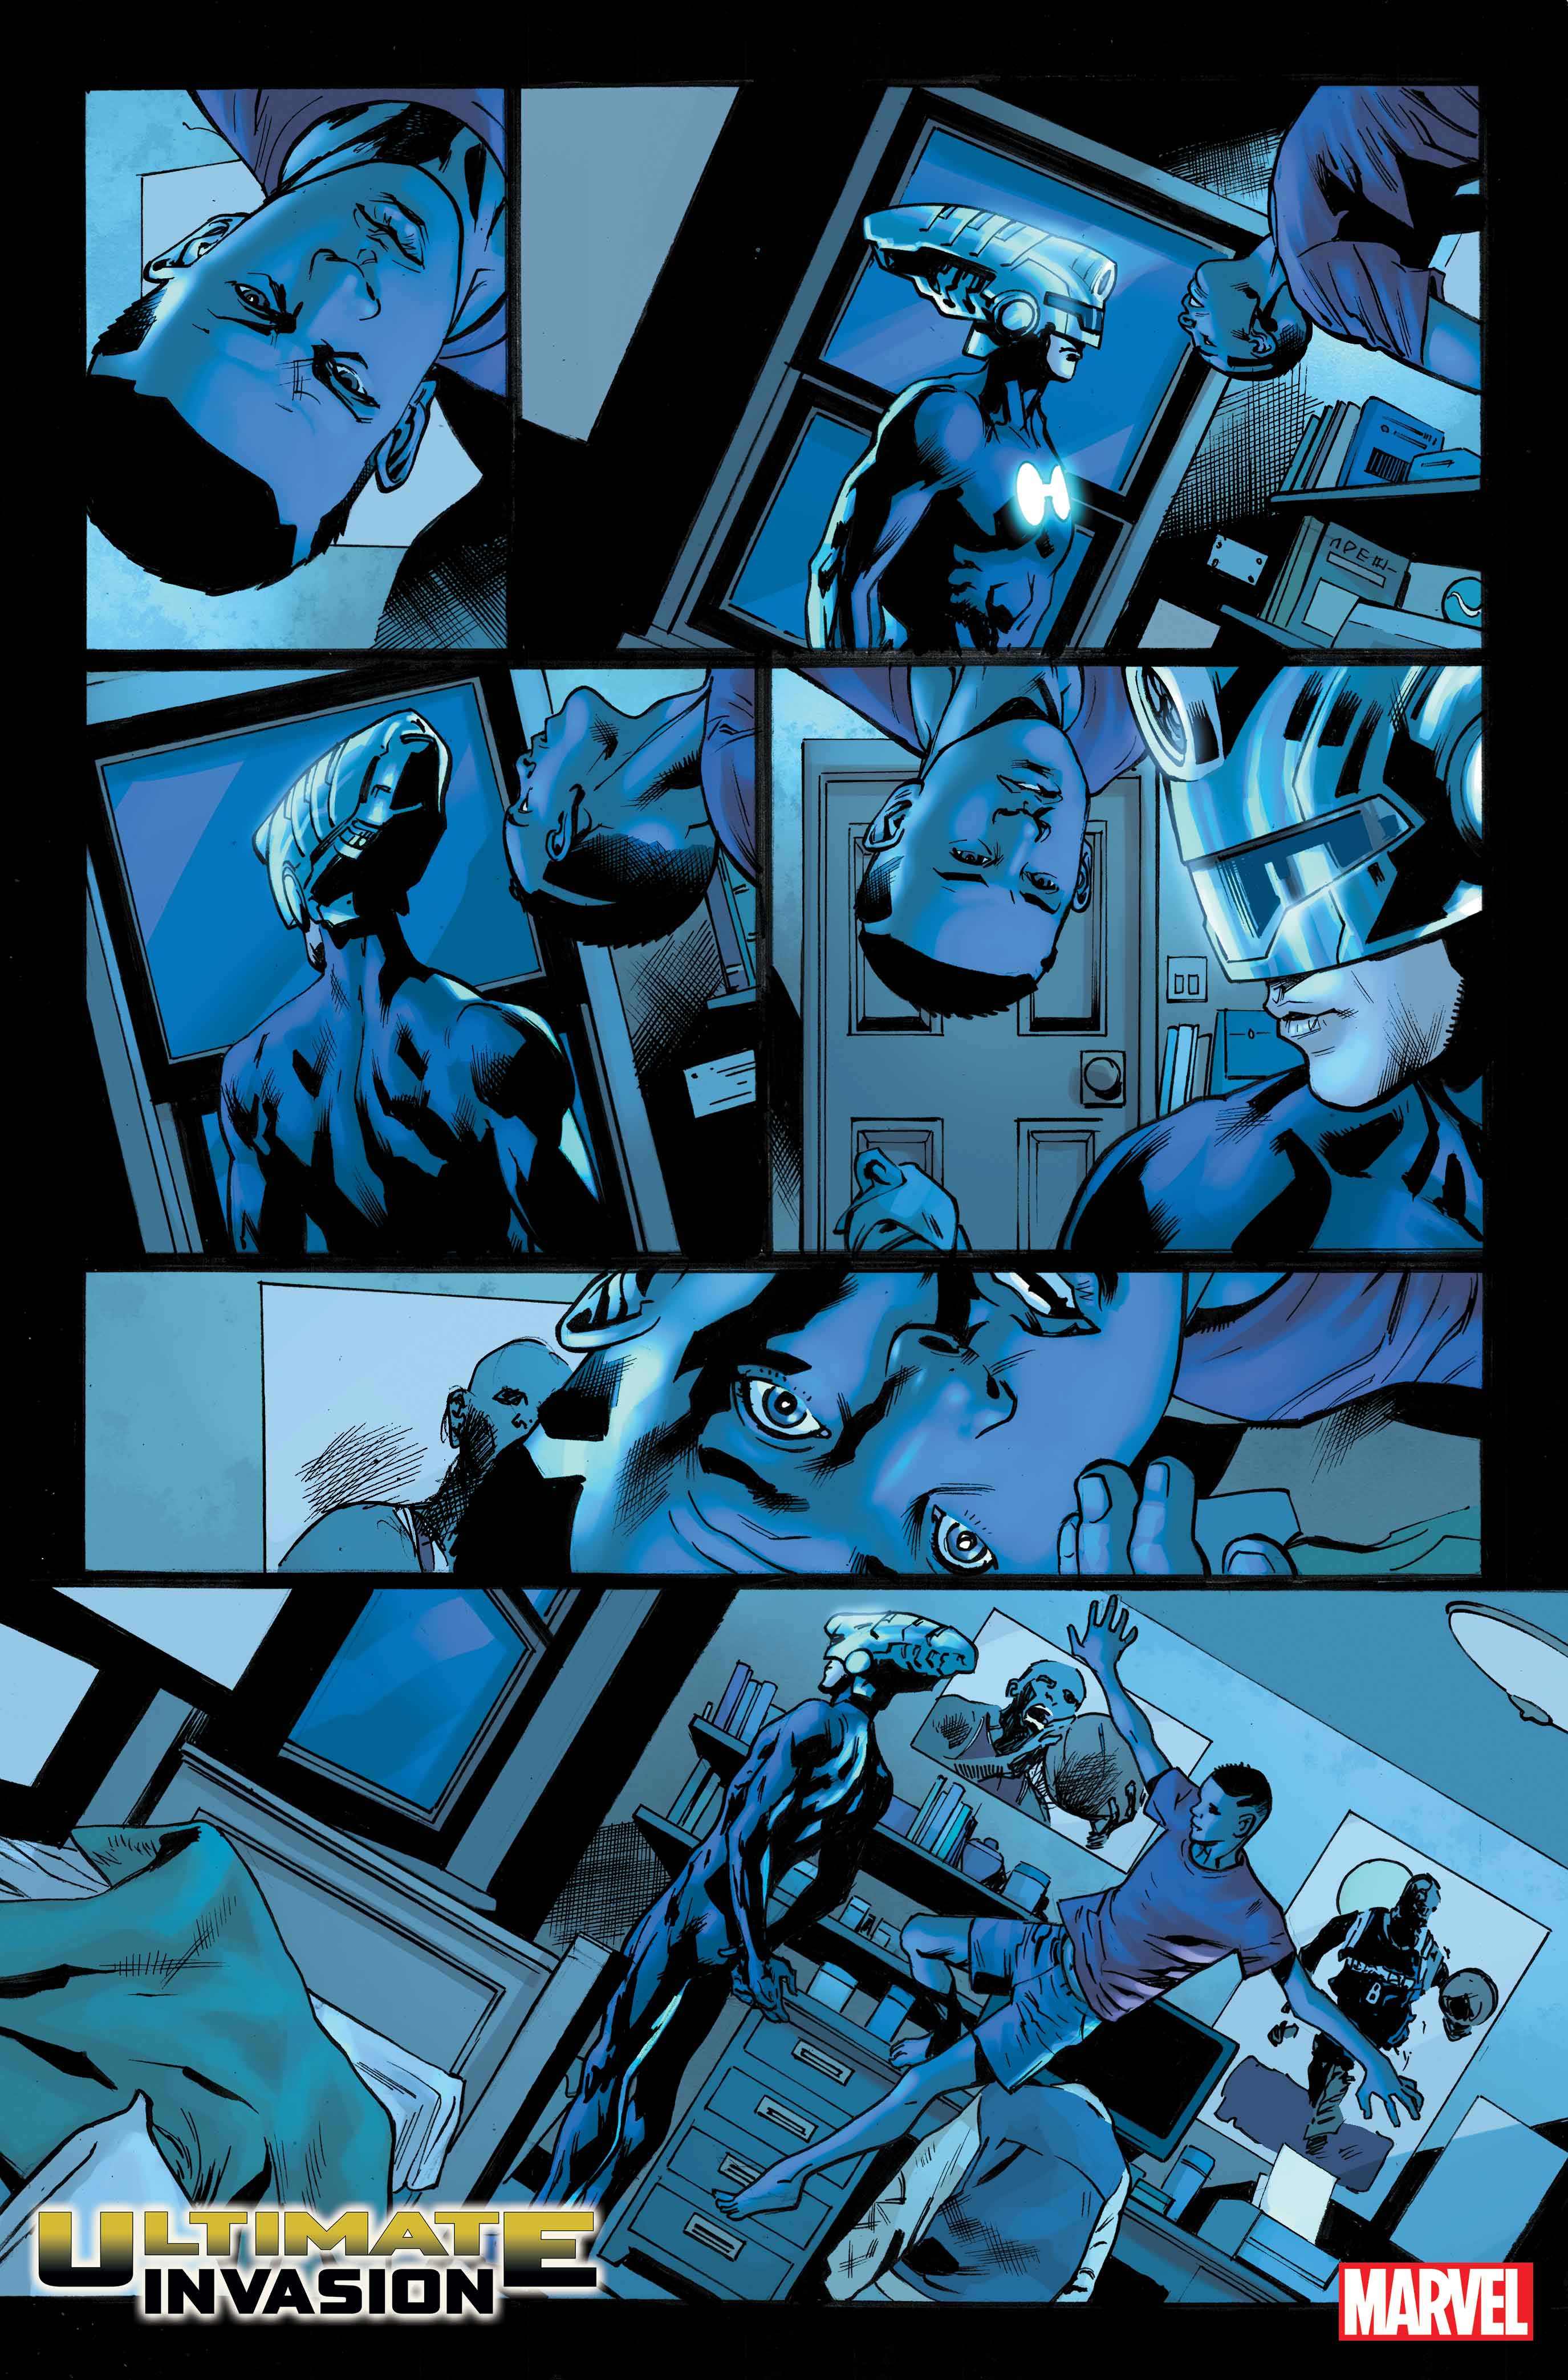 Interior page from Ultimate invasion